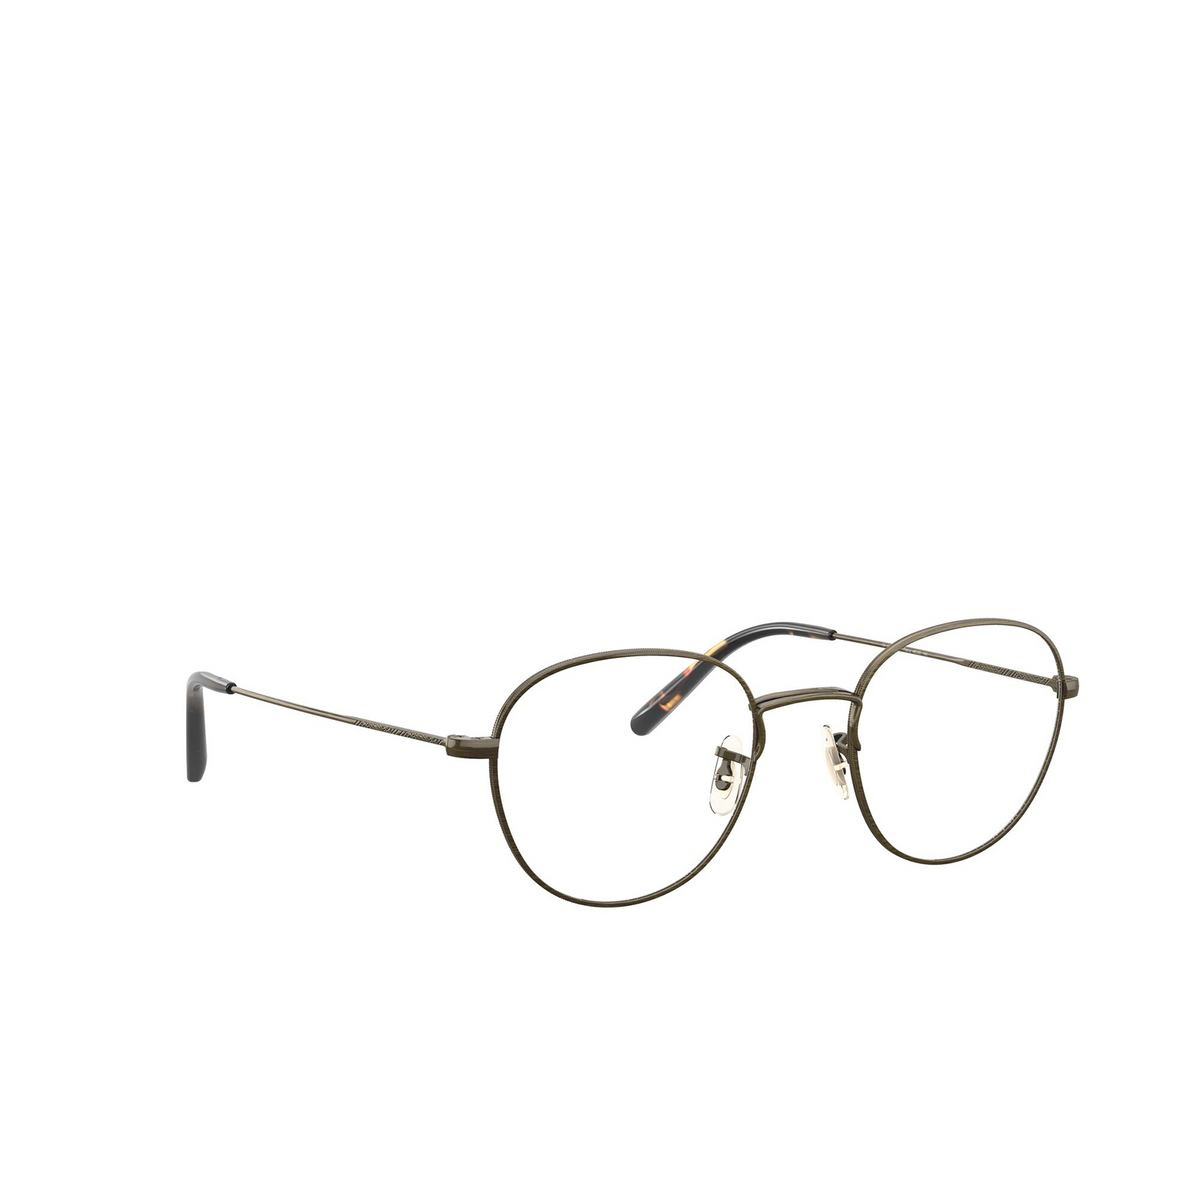 Oliver Peoples® Round Eyeglasses: Piercy OV1281 color Antique Gold 5284 - three-quarters view.